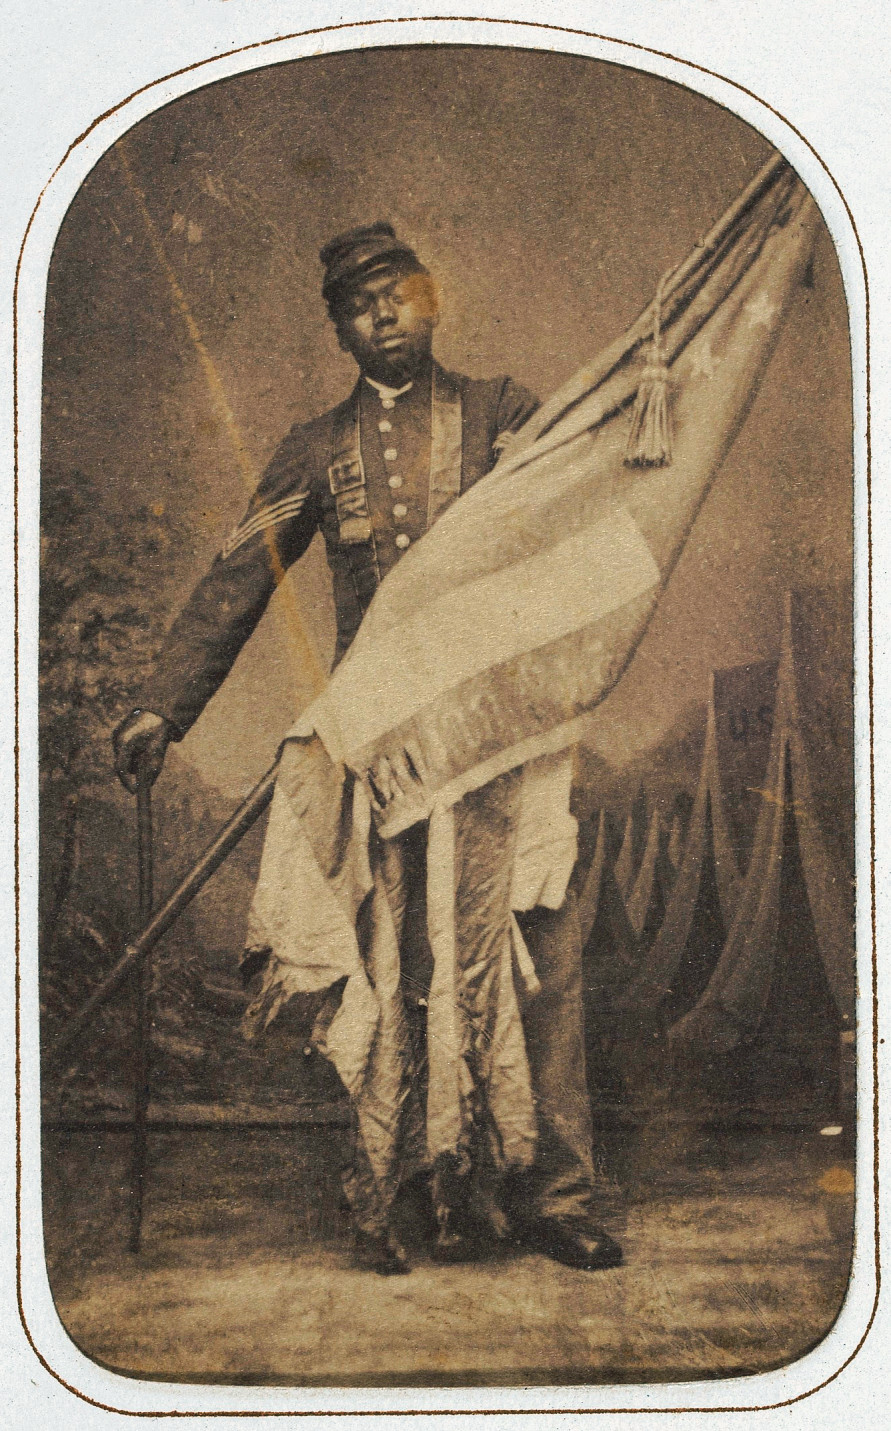 Photographer unknown, William Harvey Carney, ca. 1864, carte-de-visite album of the 54th Massachusetts Infantry Regiment, Collection of the Smithsonian National Museum of African American History and Culture, Gift of the Garrison Family in Memory of George Thompson Garrison.